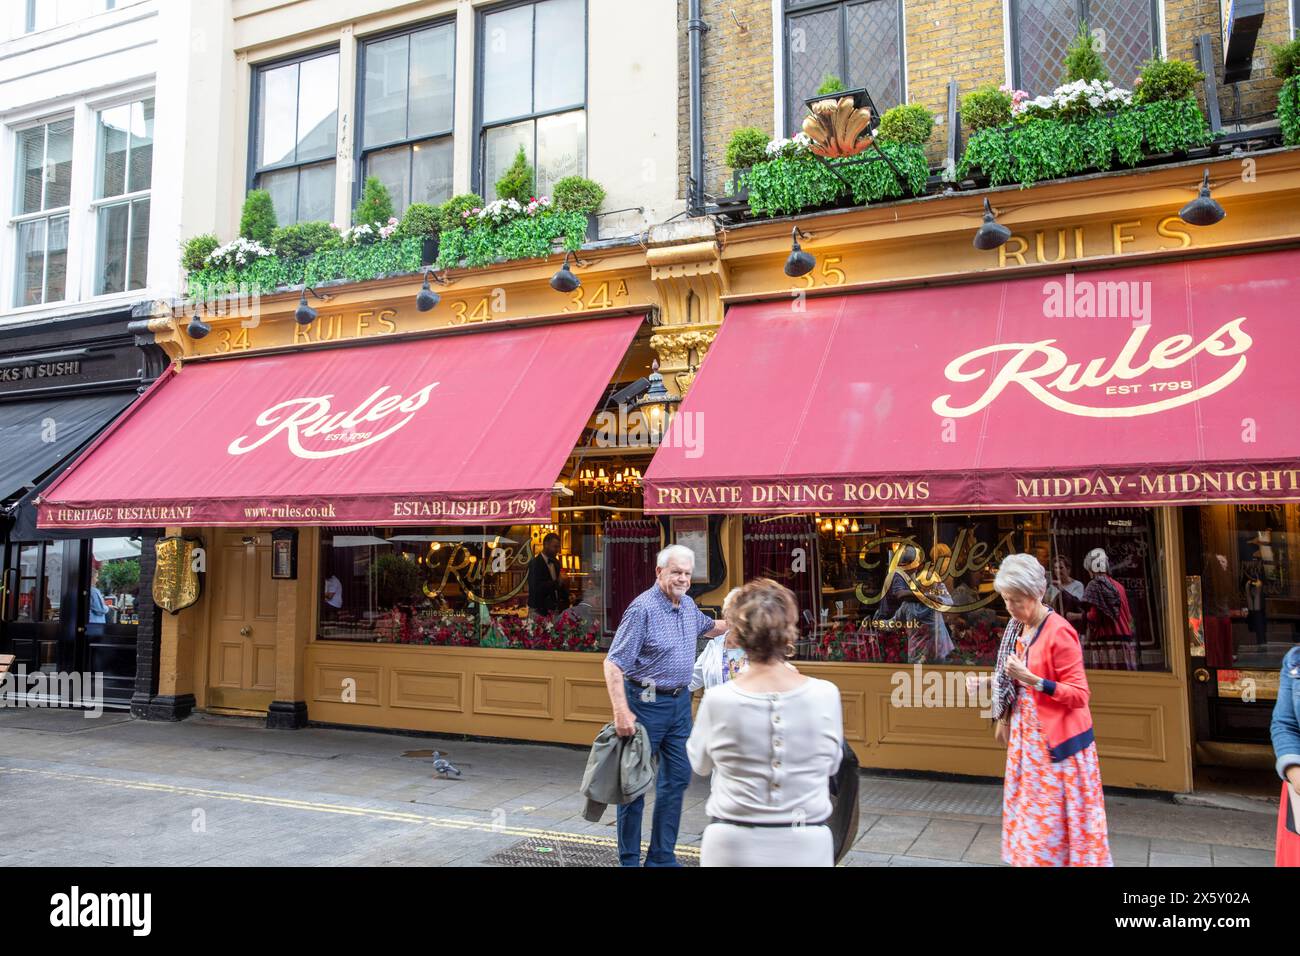 Rules restaurant, established 1798,  in Covent Garden London, oldest restaurant in London, exterior shot with red awning,England,UK,2023 Stock Photo